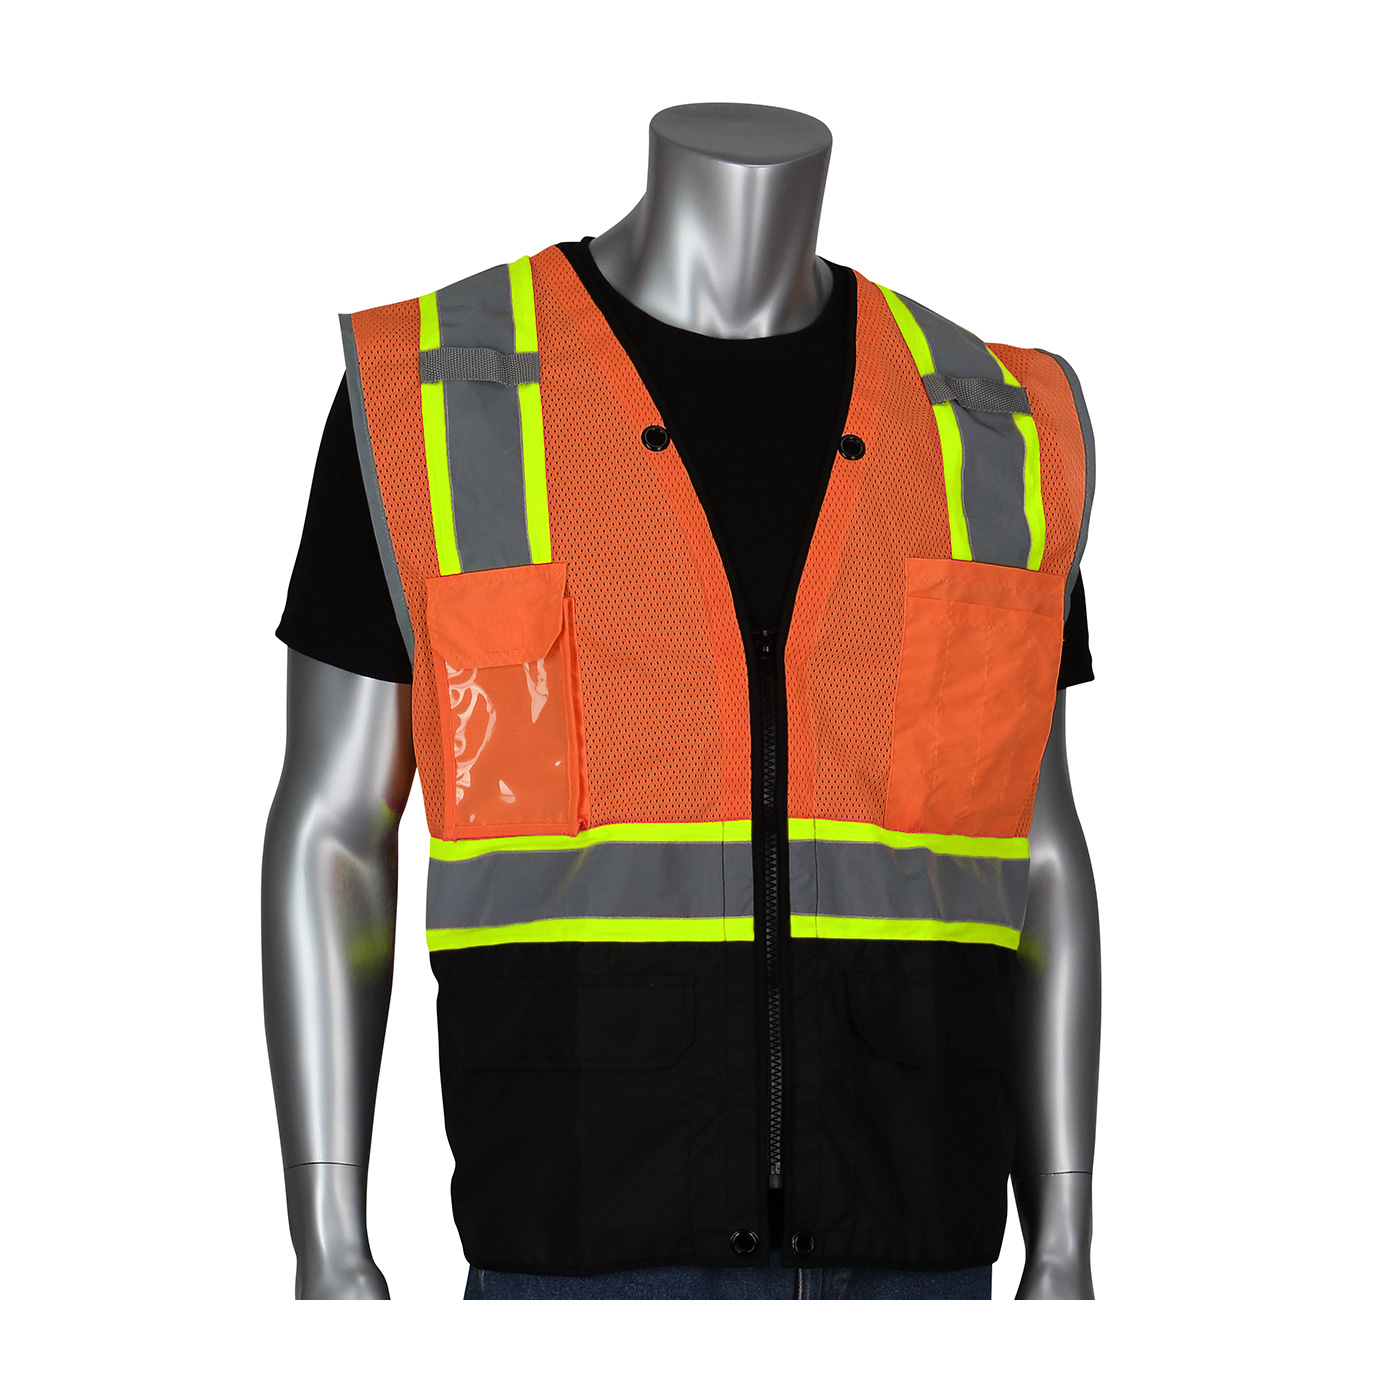 PIP® ANSI Type R Class 2 Hi-Viz Orange Two-Tone Eleven Pocket Tech-Ready Mesh Surveyors Vest with Ripstop Black Bottom Front and `D` Ring Access #302-0650D